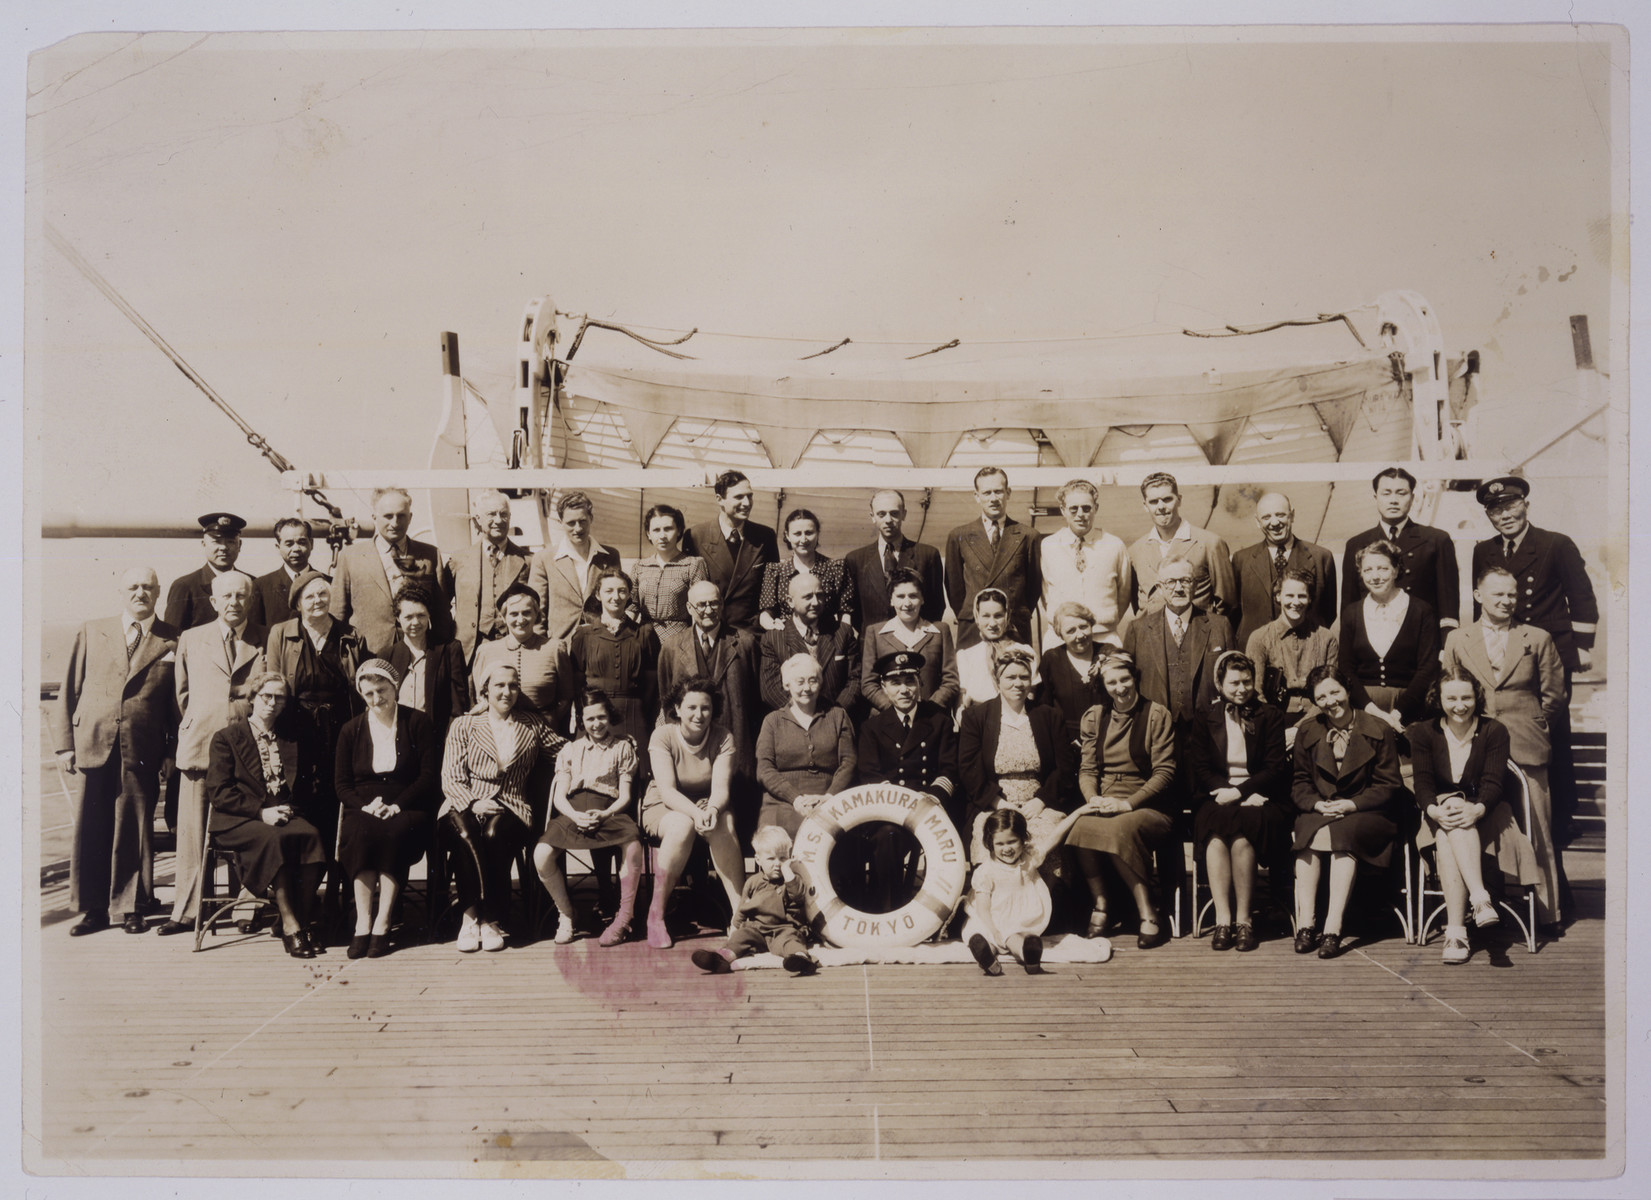 The passengers on the M. S. Kamakura Maru en route to the United States.